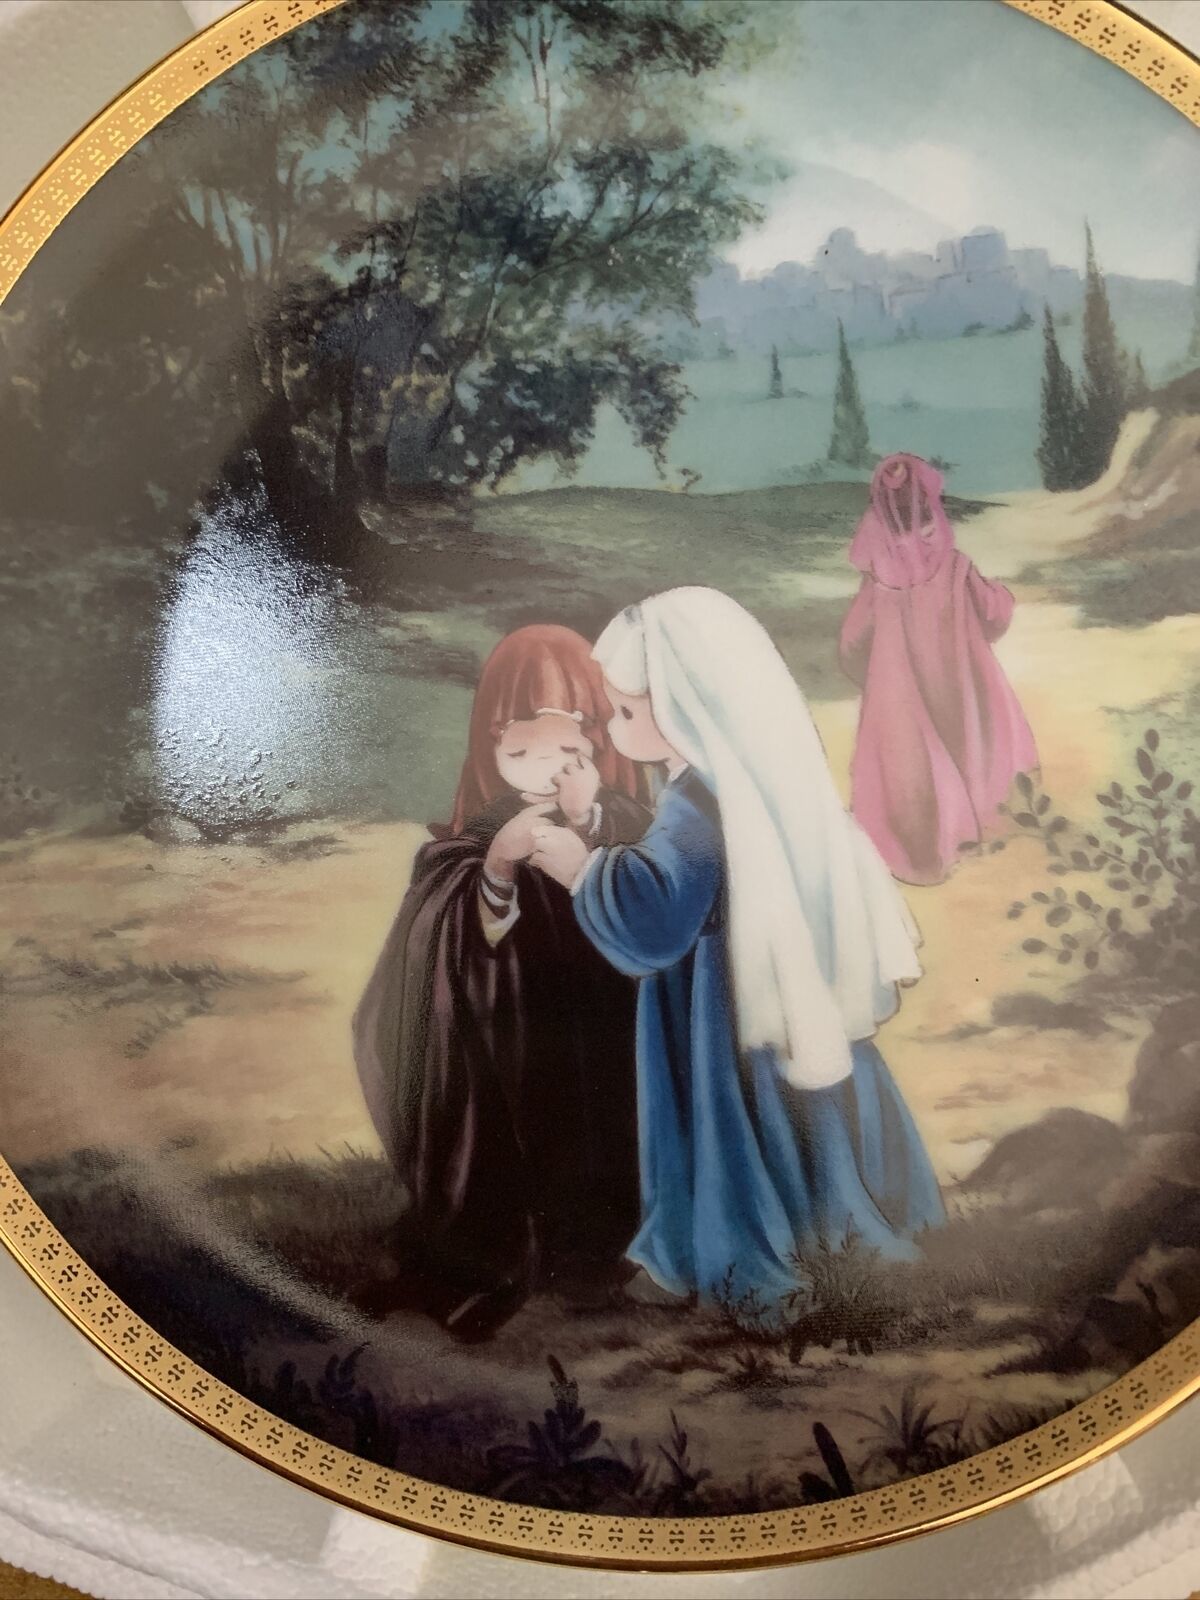 Precious Moments "WHERE YOU GO, I WILL GO” Favorite Old Testament Stories Plate - $5.00